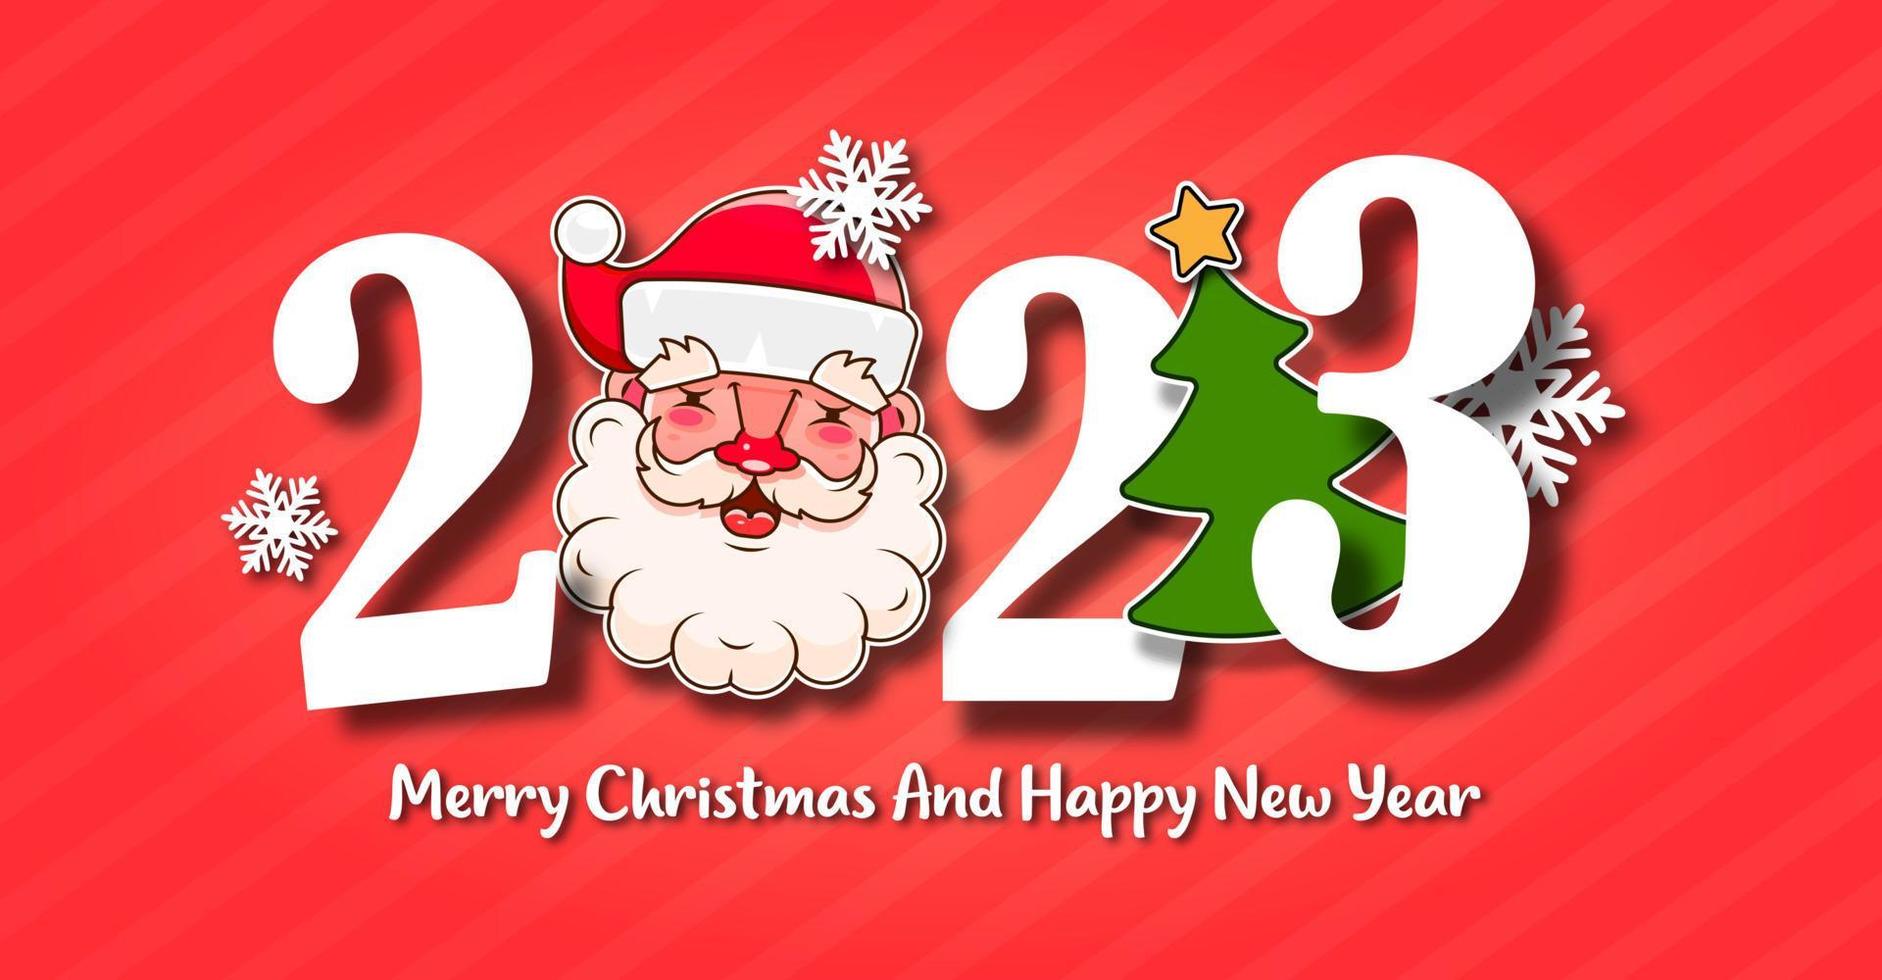 I Wish You A Merry Christmas And Happy New Year Vintage Background With Typography. 2023